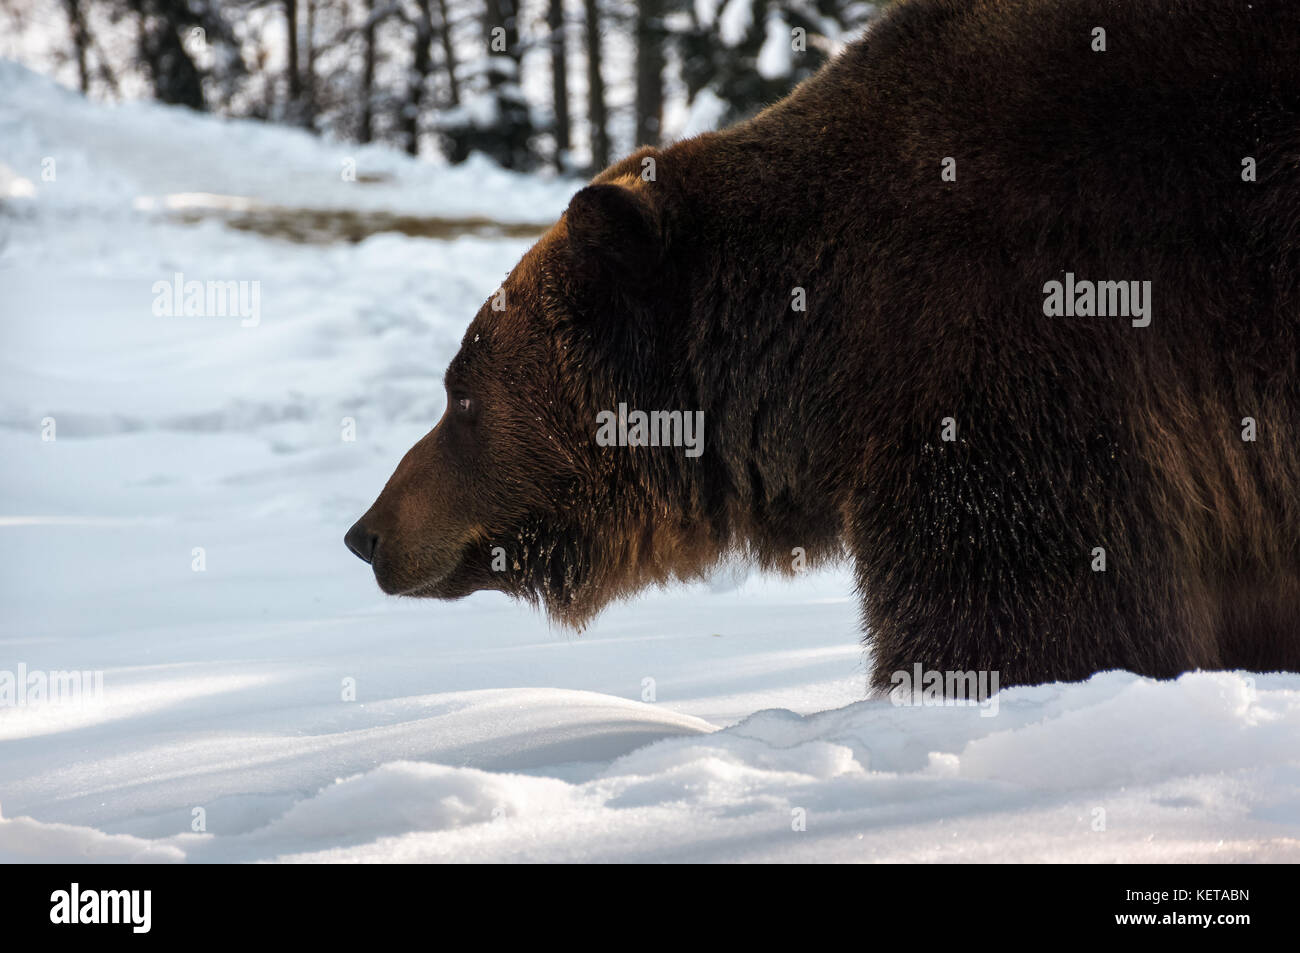 old brown bear hunting in winter forest. animal searching for food Stock Photo